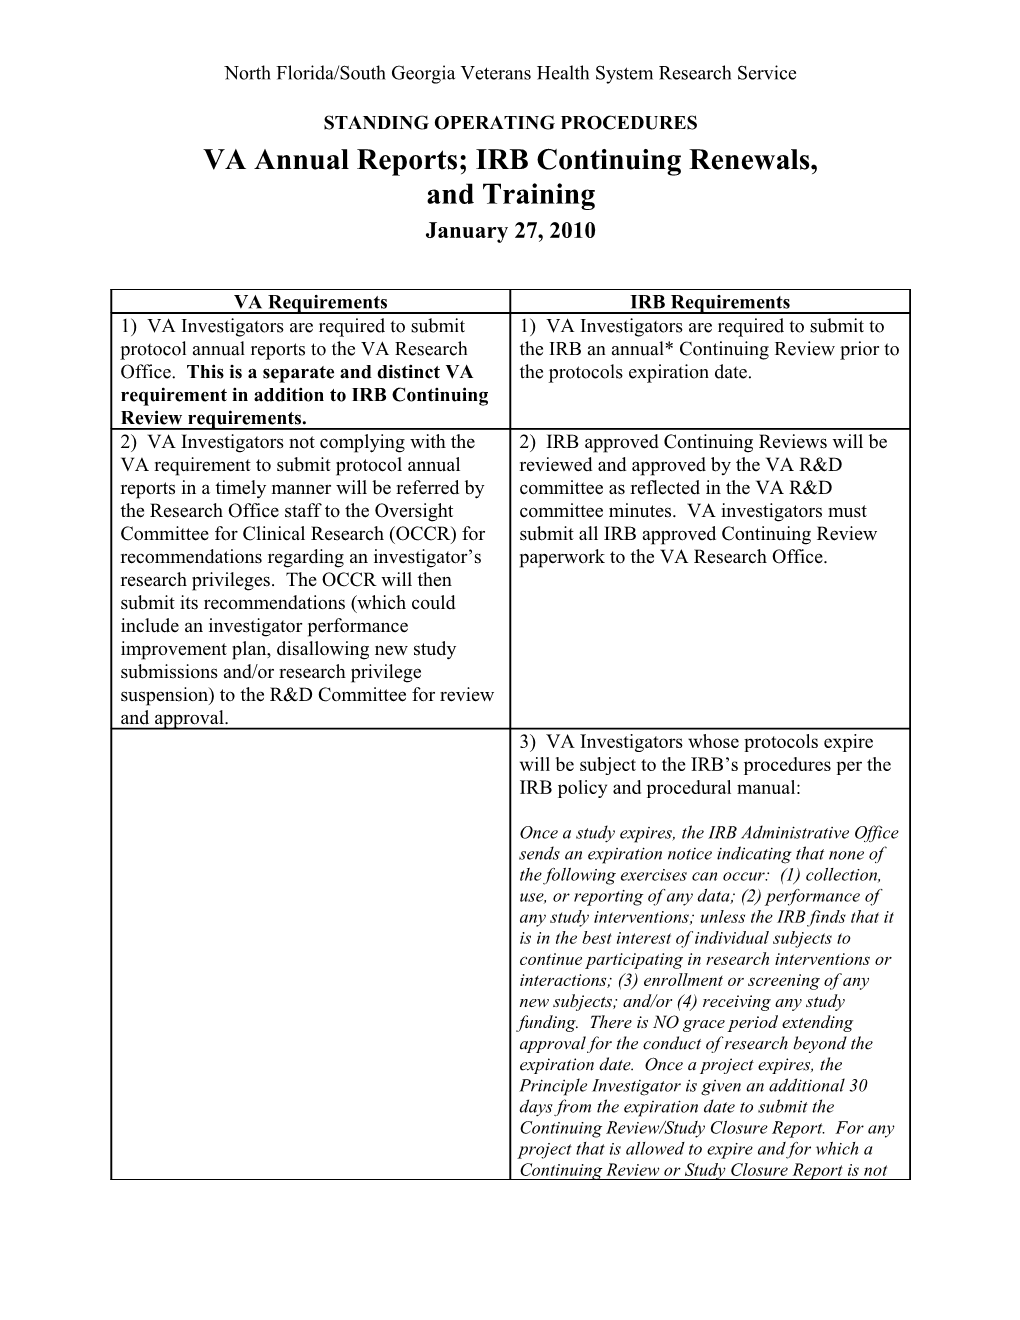 VA Annual Reports; IRB Continuing Renewals; and Training Sops